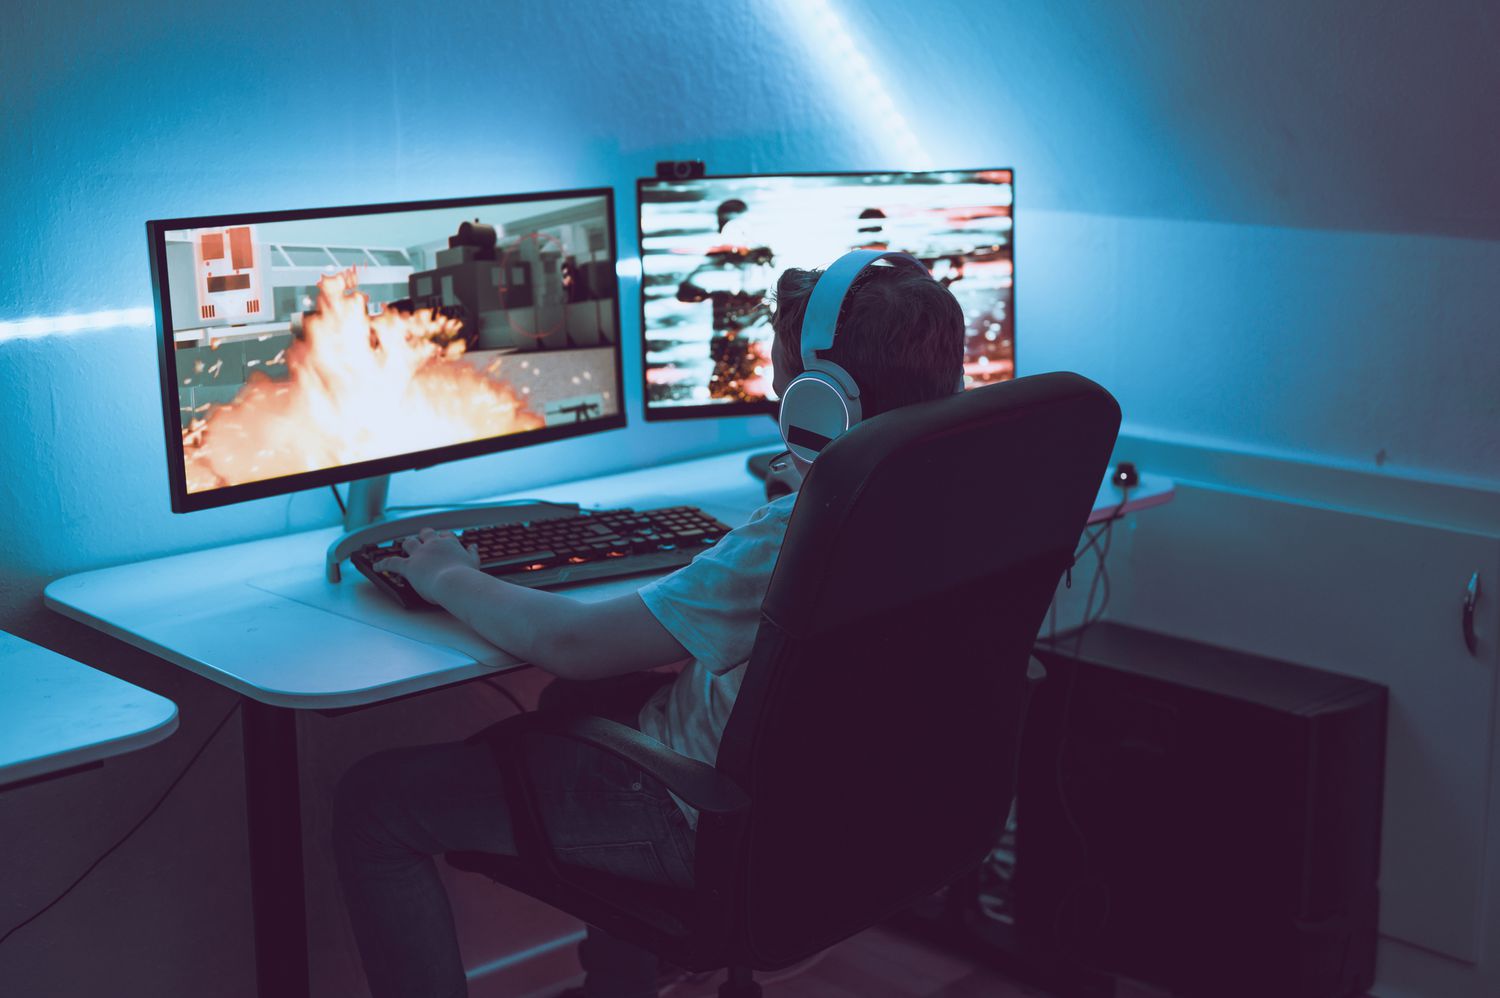 Enhancing Your Gaming Experience